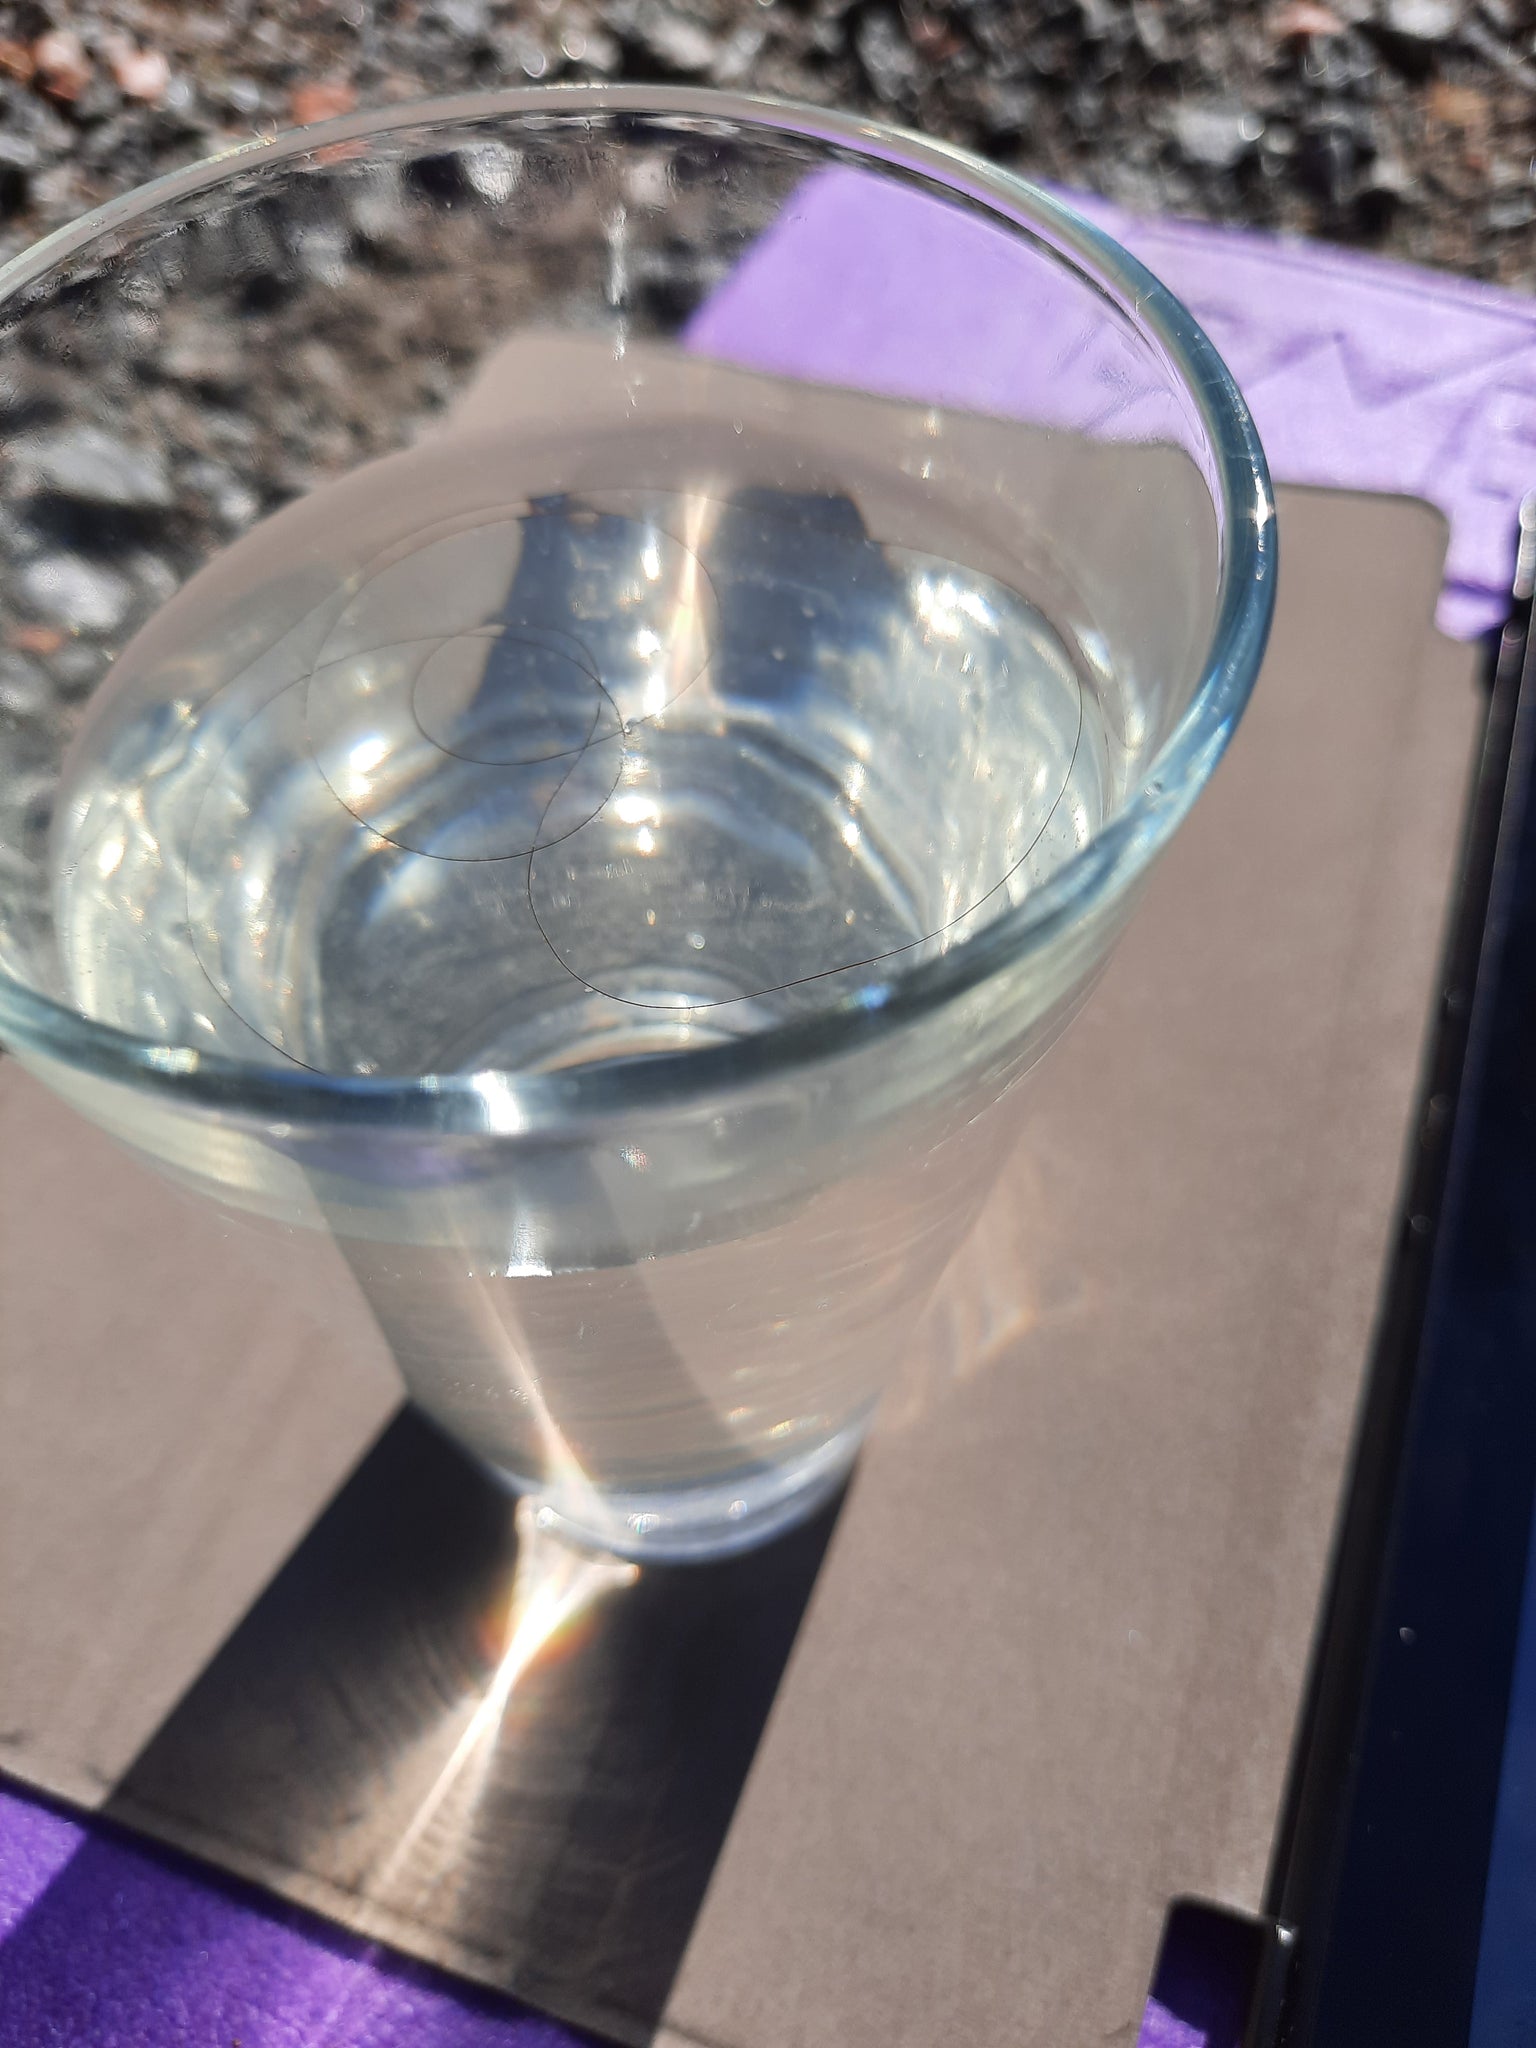 Test how porous your hair is with a glass of water